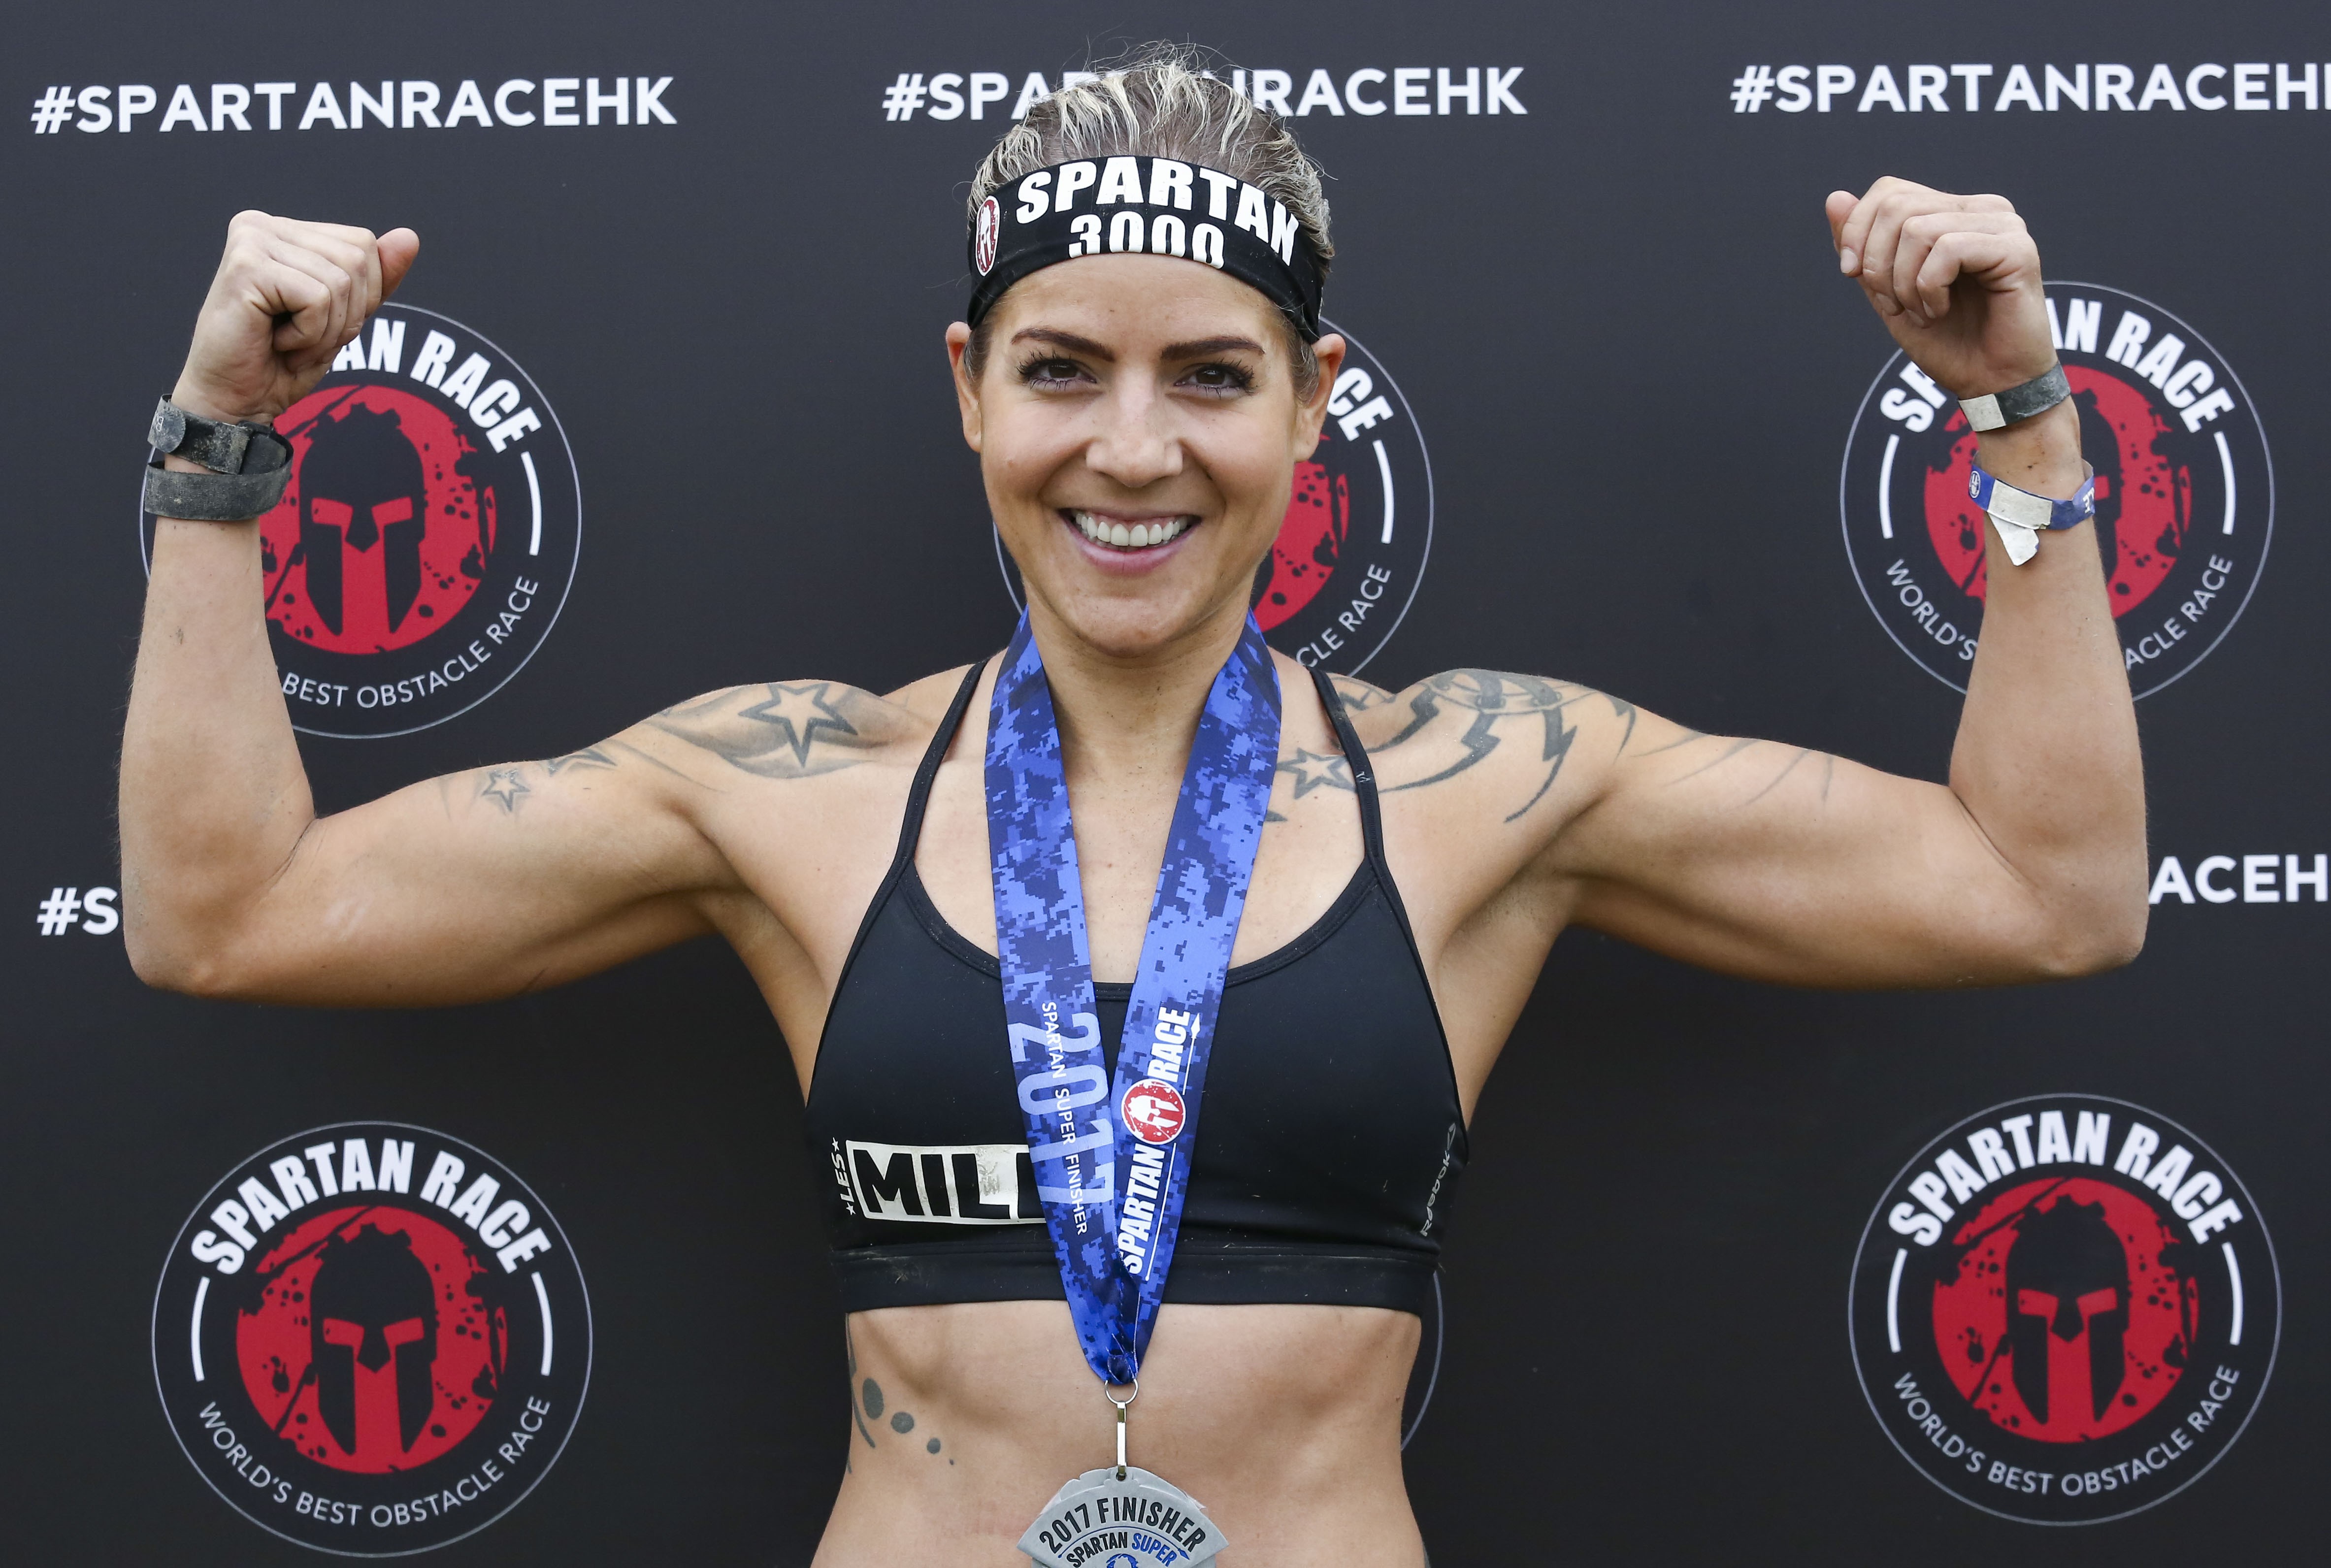 Switzerland’s Magdalena Cvetkovic was the clear winner of the women’s elite division at the Spartan Race. Photo: Jonathan Wong